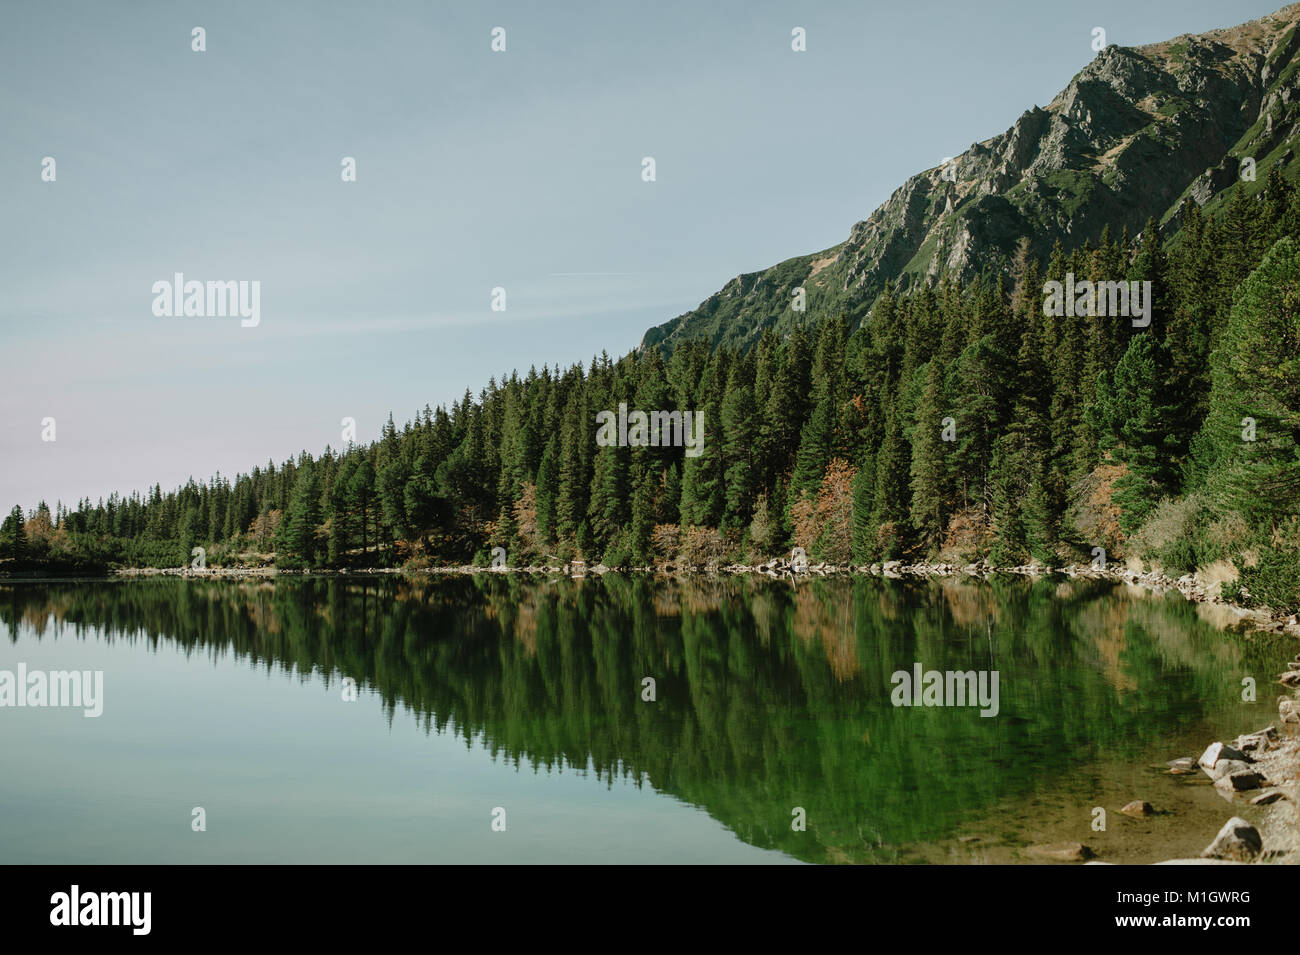 View of a forest lake with reflection of evergreen trees in the lake. Stock Photo